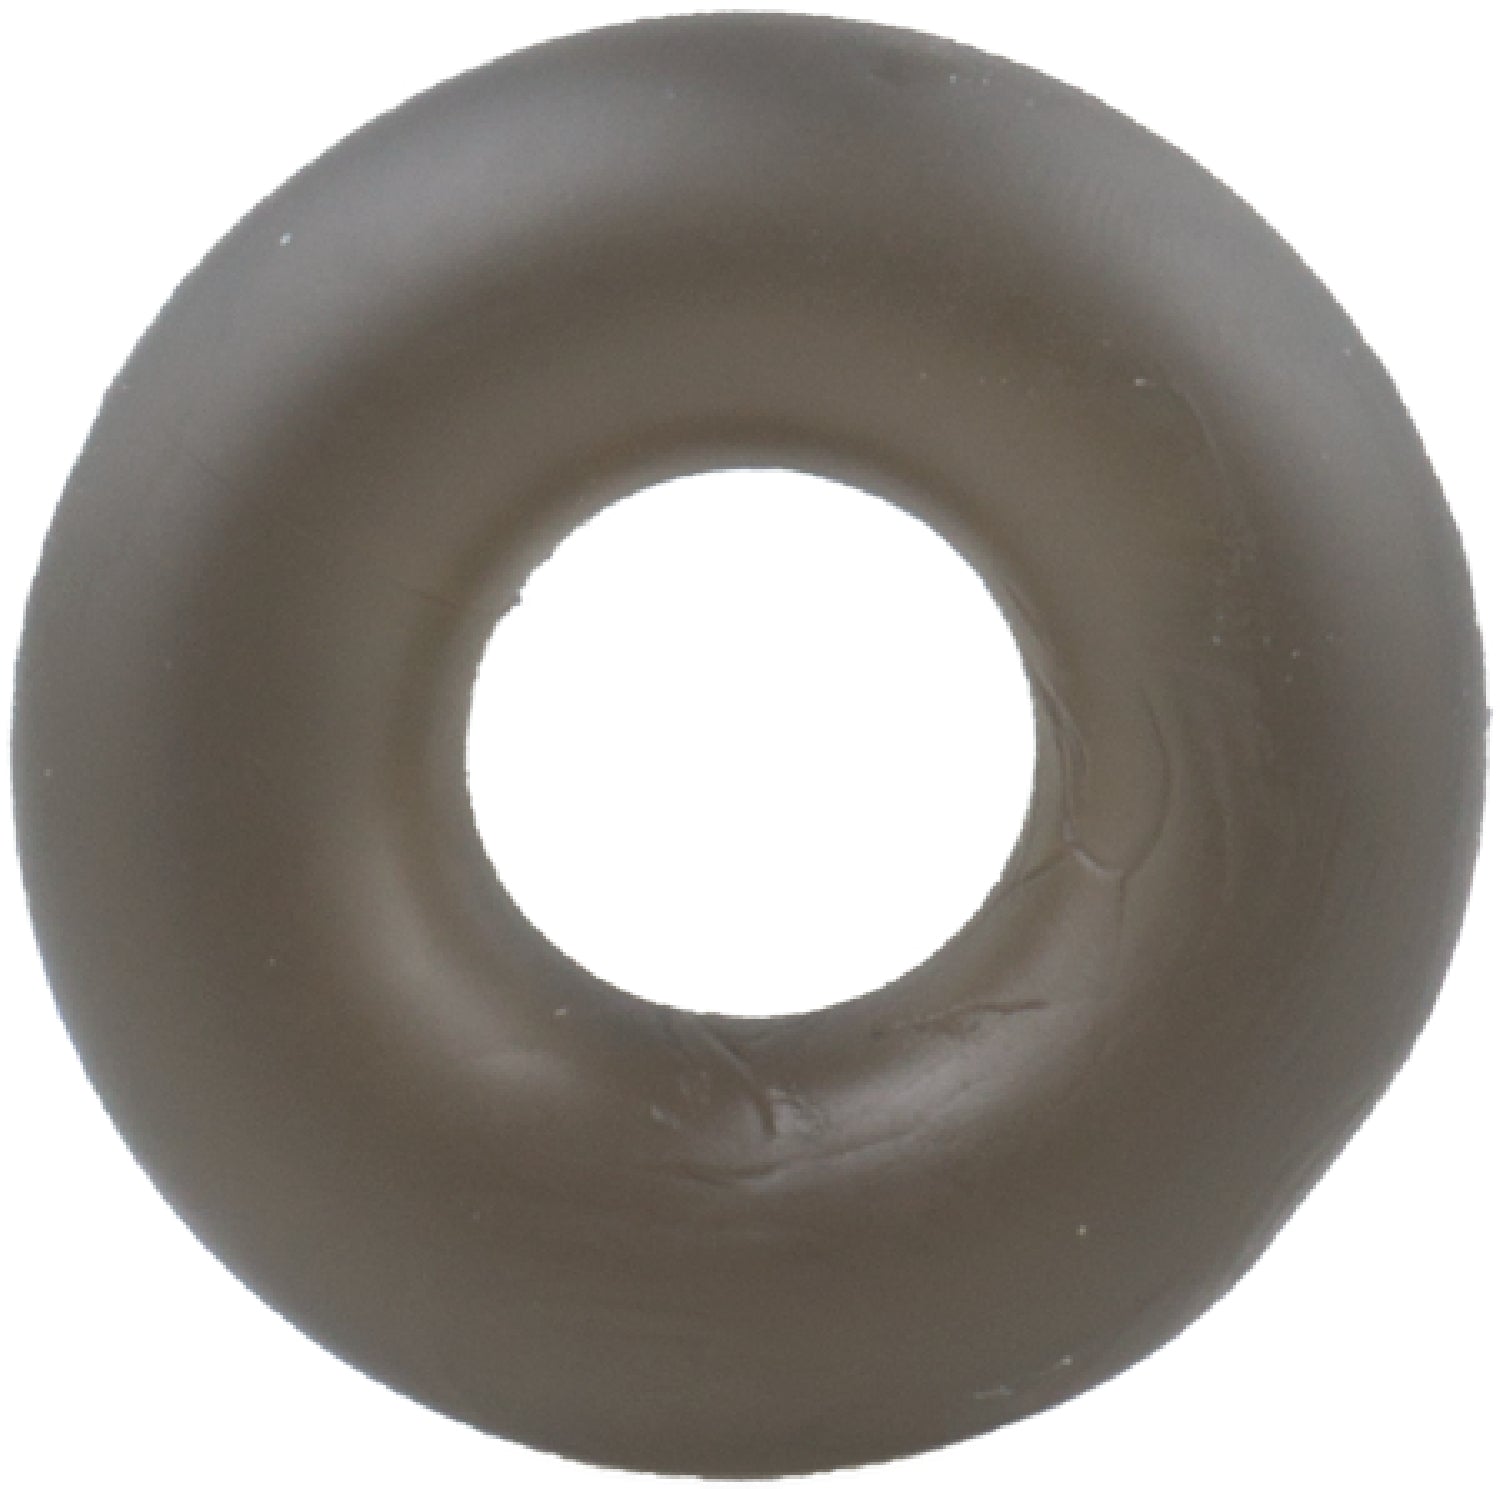 Stretchy Penis Cock Ring- Smoke Donut-Shaped Cock Ring - Early2bed